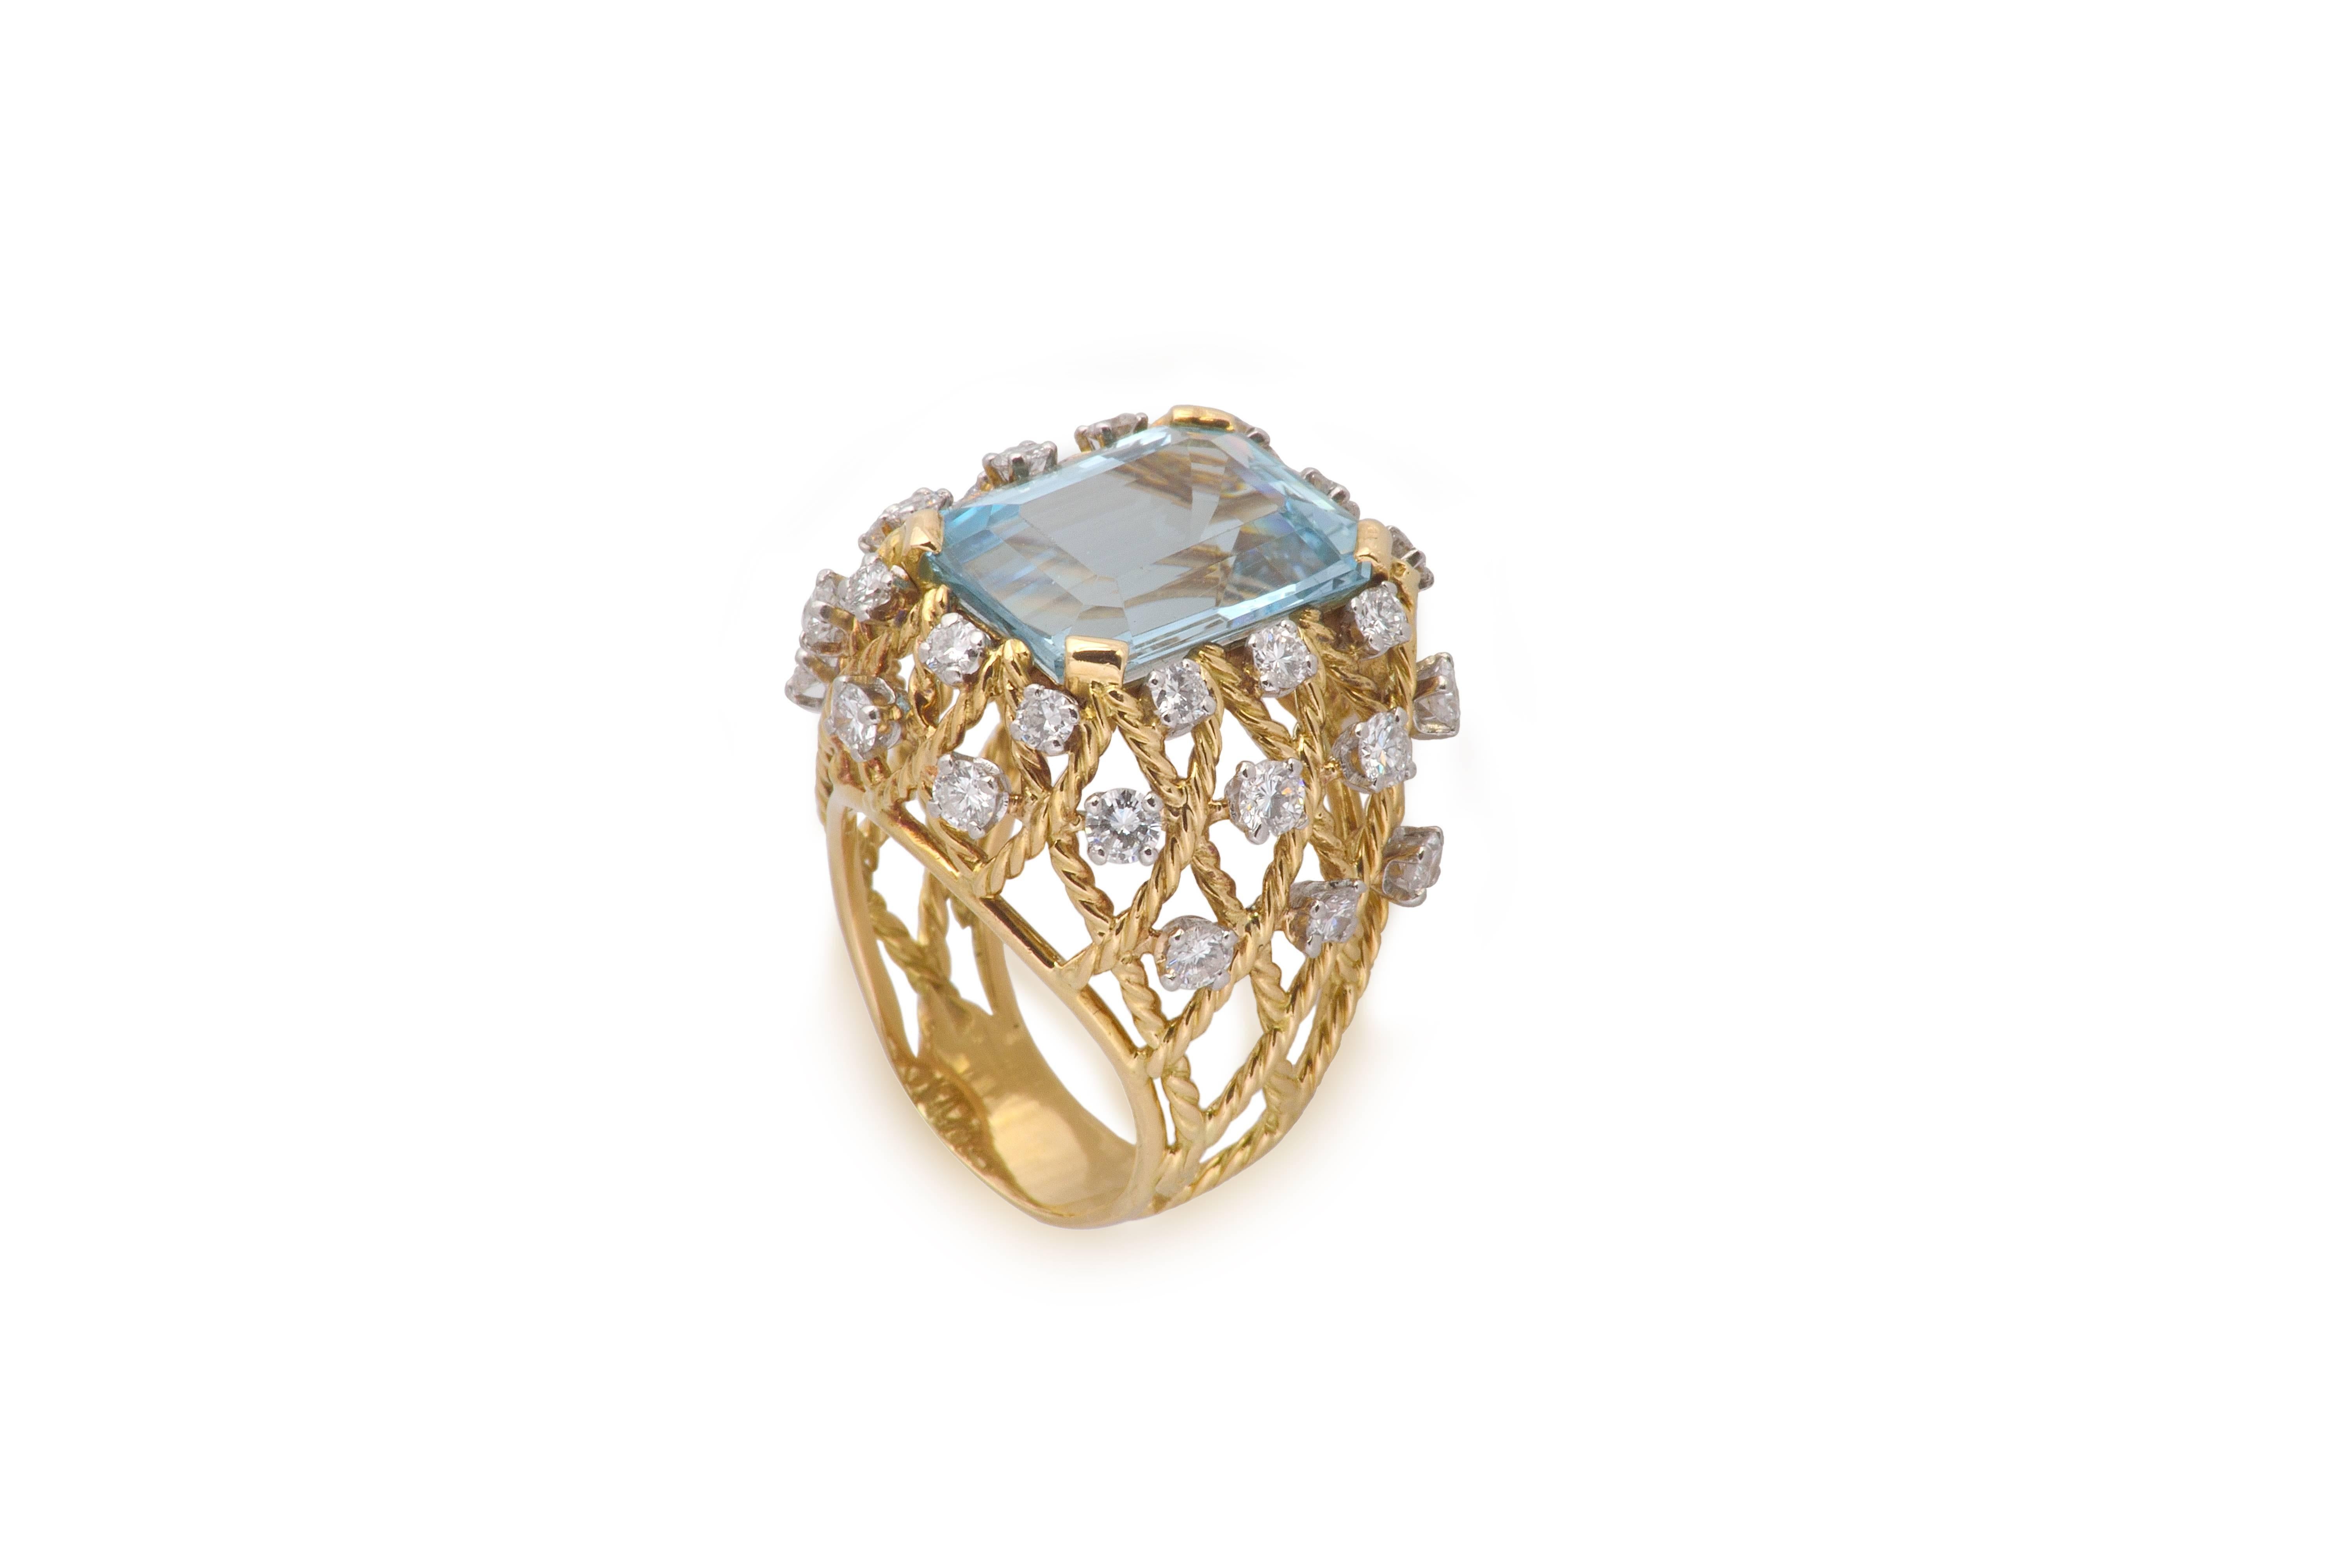 This cluster ring showcases a stunning 12 carats aprox. Aquamarine at its center. Displaying its stunning intense blue color and exceptional clarity, this elegant jewel is accentuated by brilliant cut-diamonds weighing 1’50 carats.
French assay